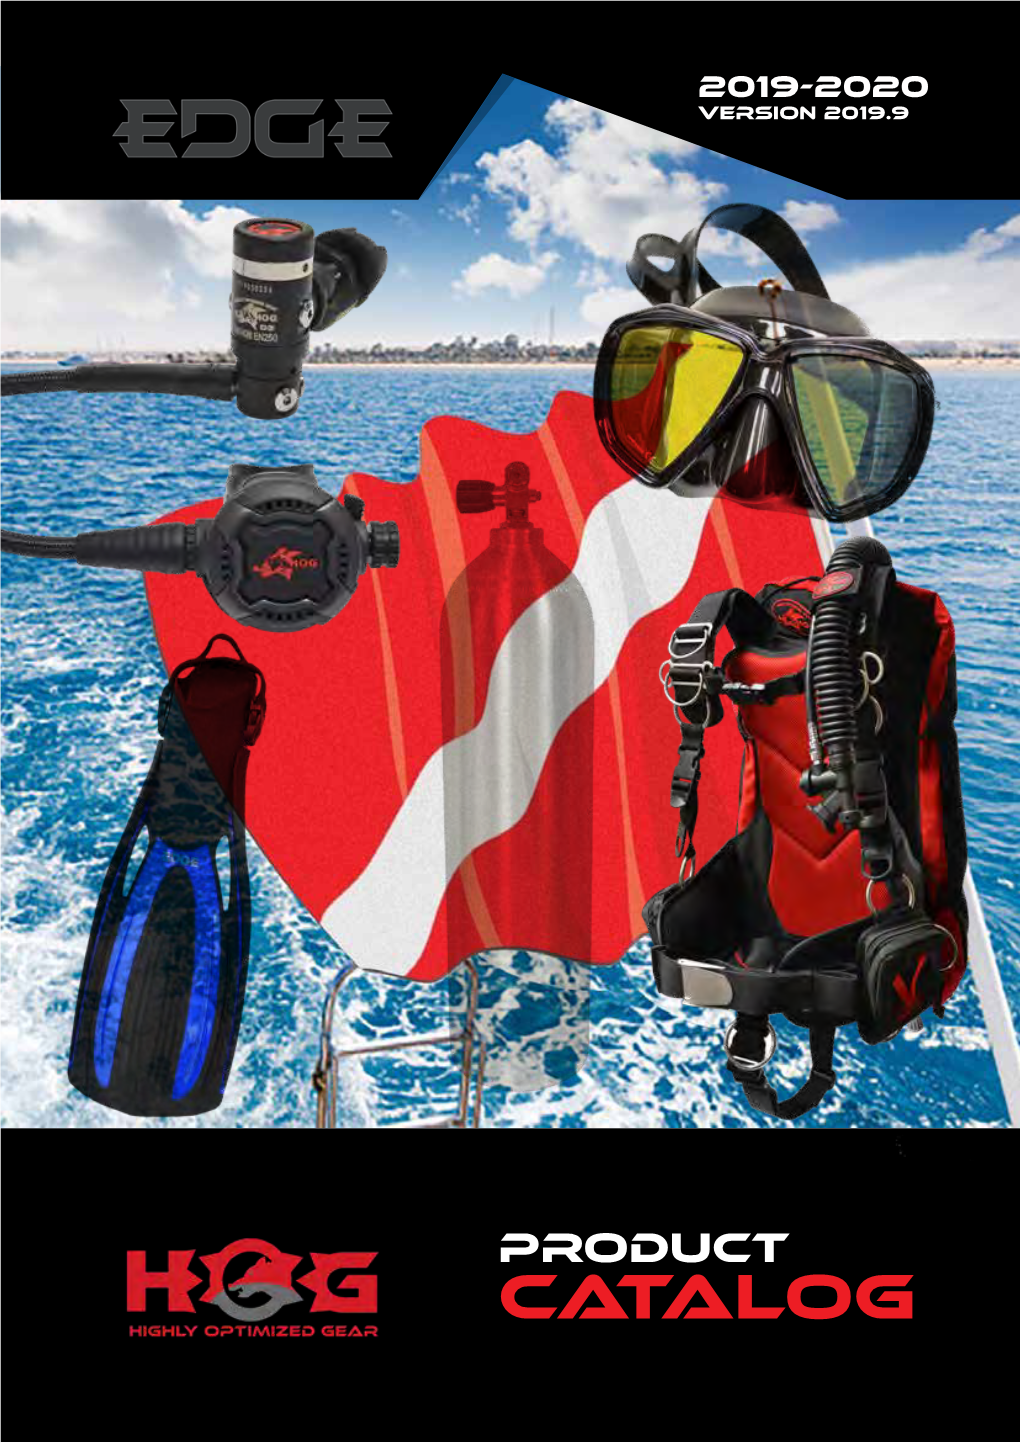 CATALOG Welcome Edge-Hog Dive Gear Is a Value Driven Company That Provides Divers the Highest Quality Scuba Equipment, at the Best Price Possible